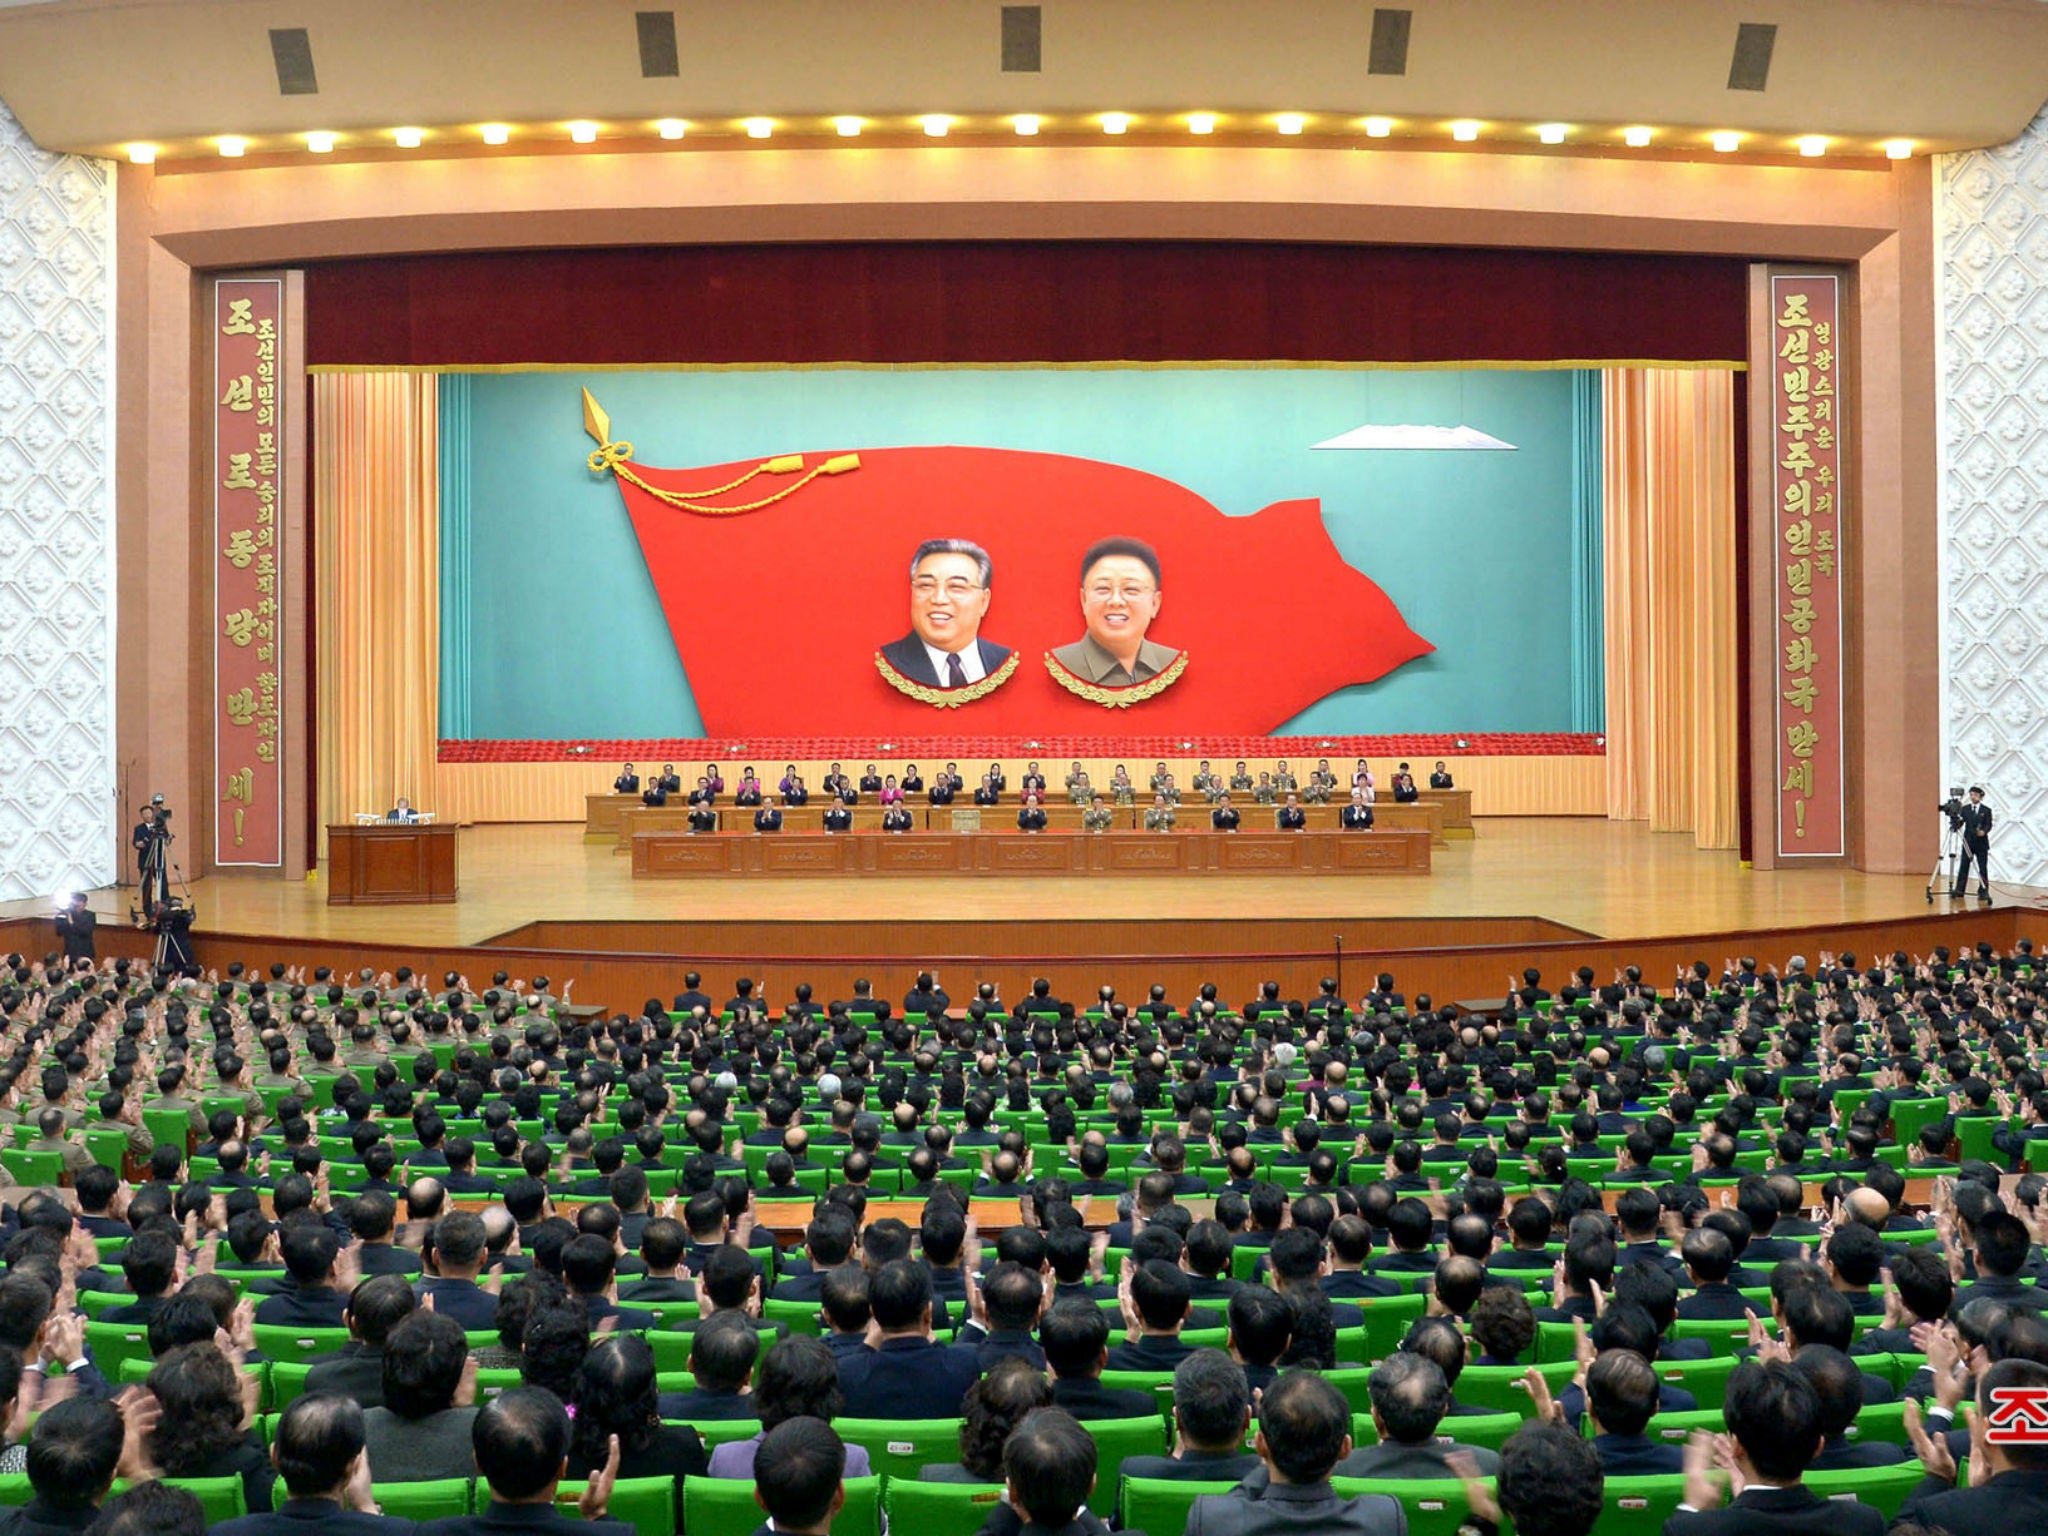 A general view of a national meeting that took place at the People's Palace of Culture on Sunday to mark the 100th birth anniversary of the anti-Japanese war heroine Kim Jong Suk in this photo released by North Korea's Korean Central News Agency (KCNA) in Pyongyang.